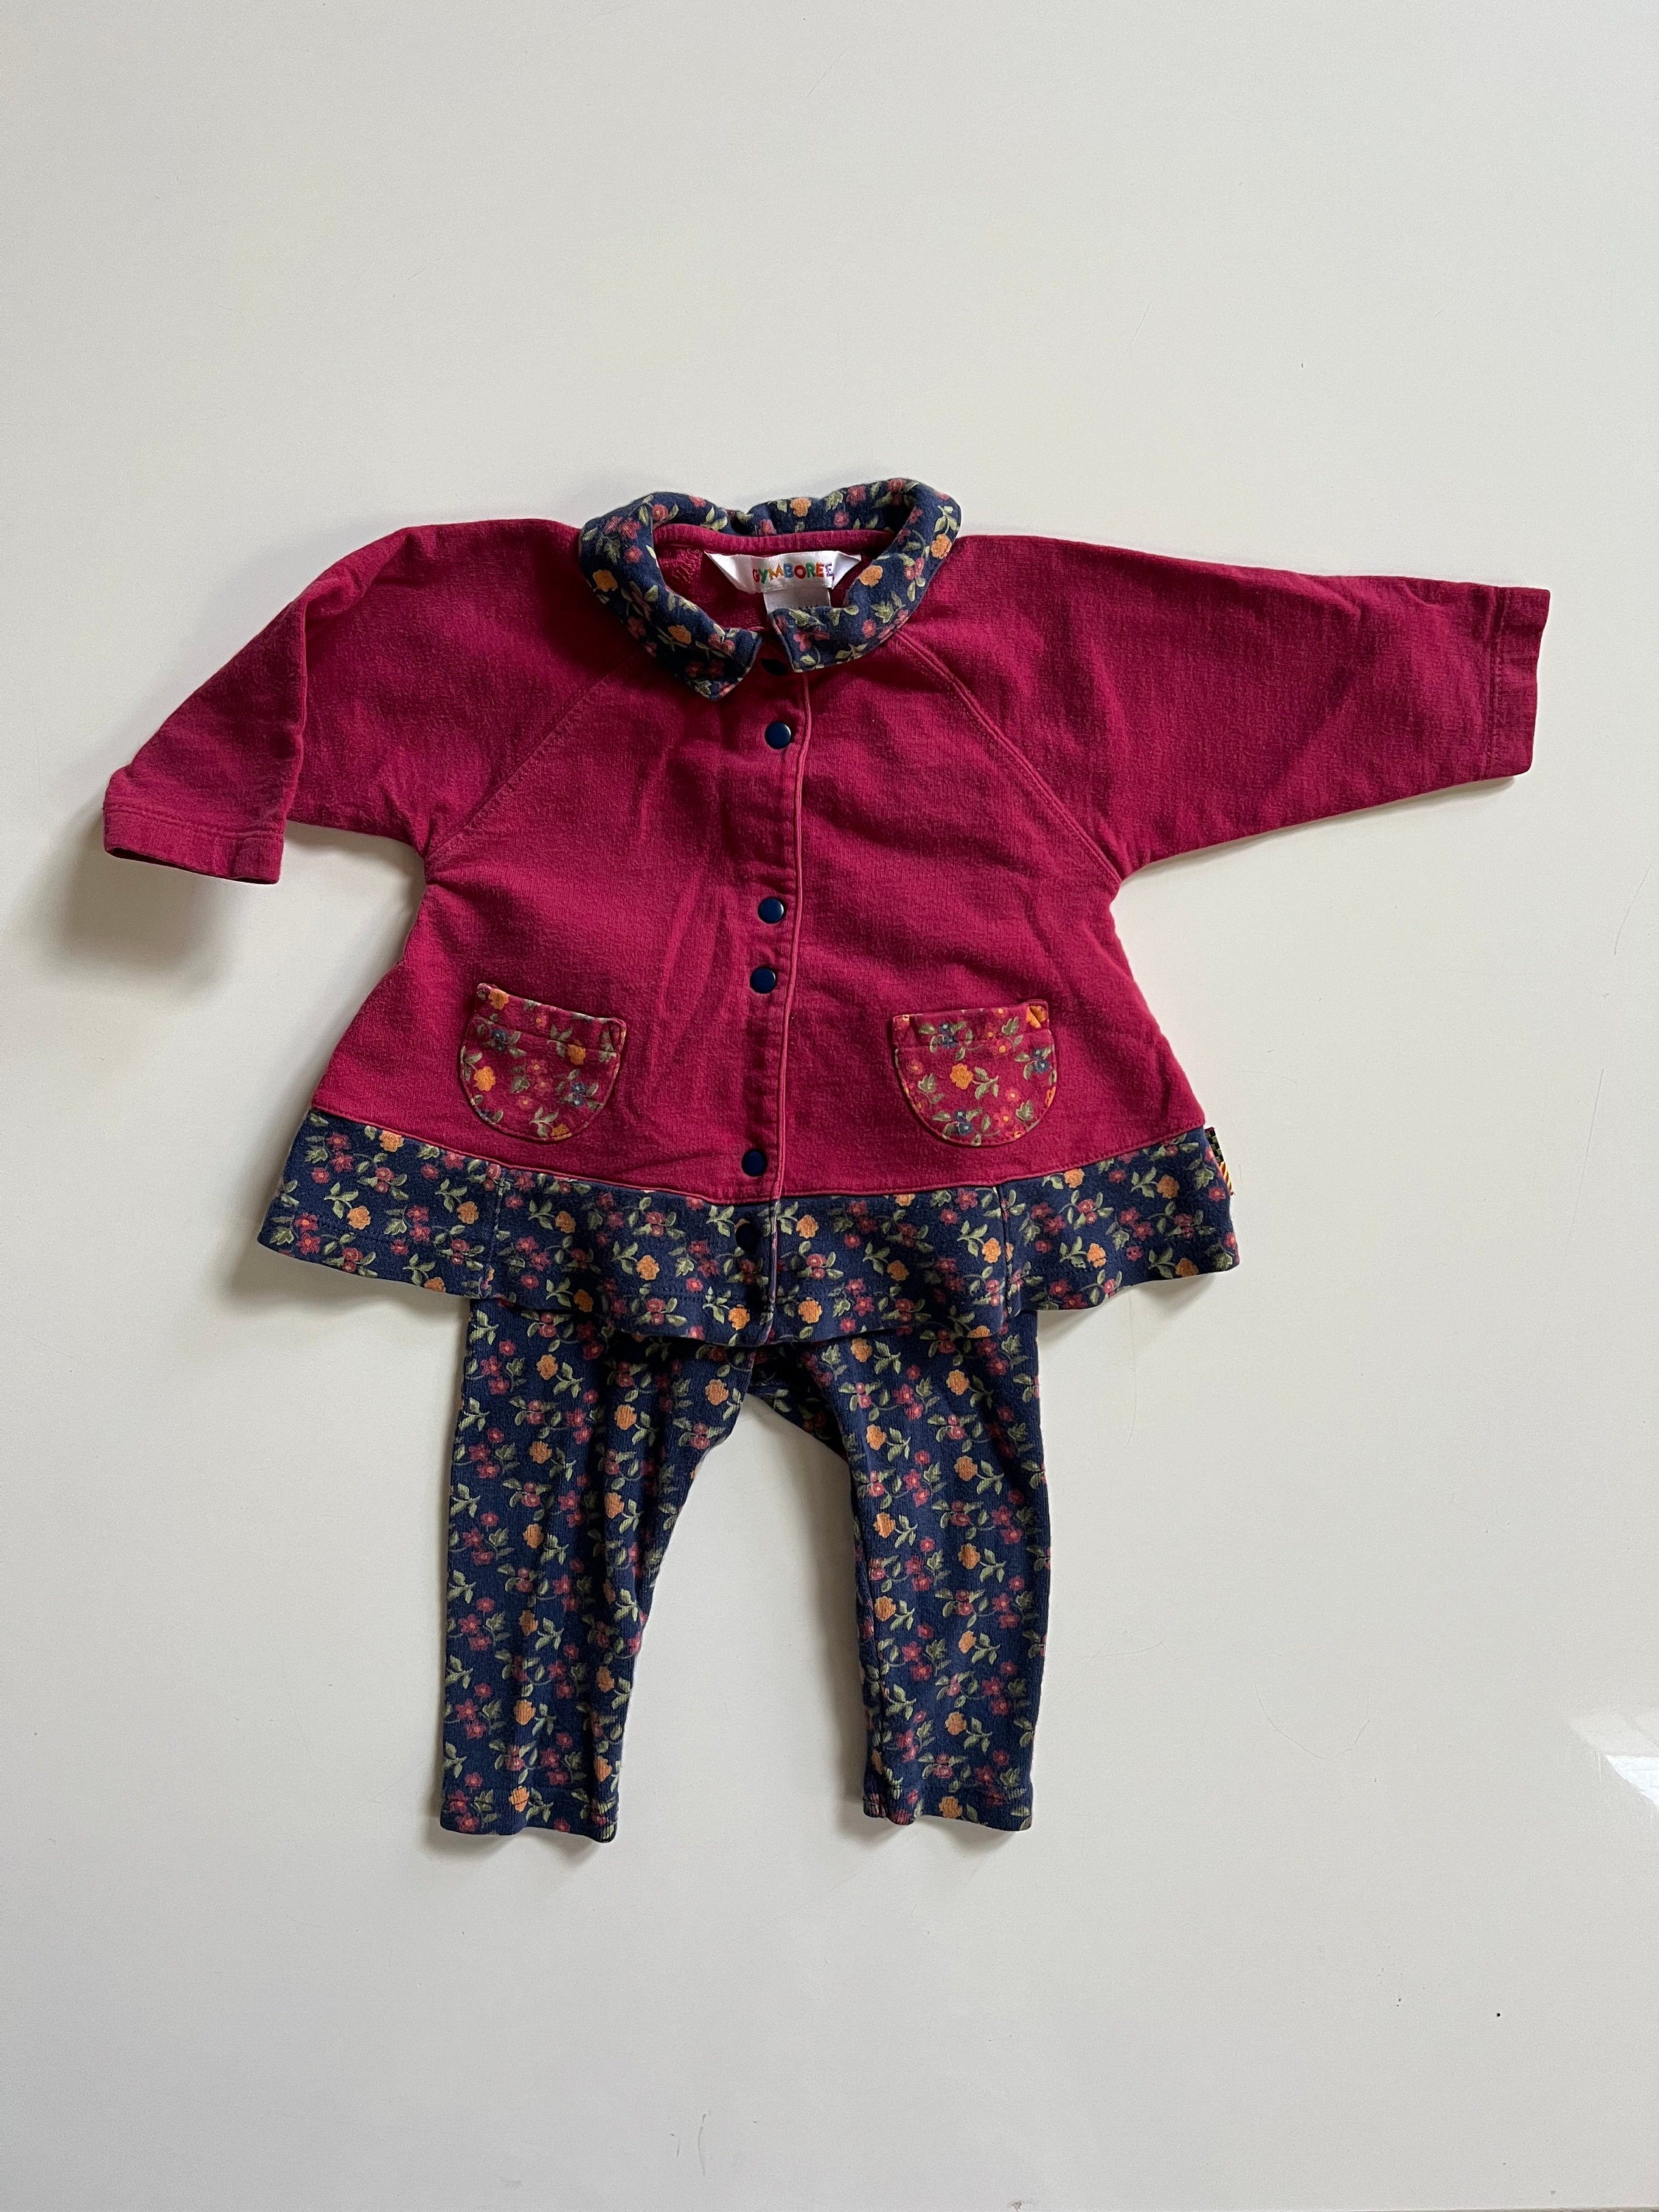 Vintage Gymboree Lounge Set Baby Girl All Cotton in Burgundy and